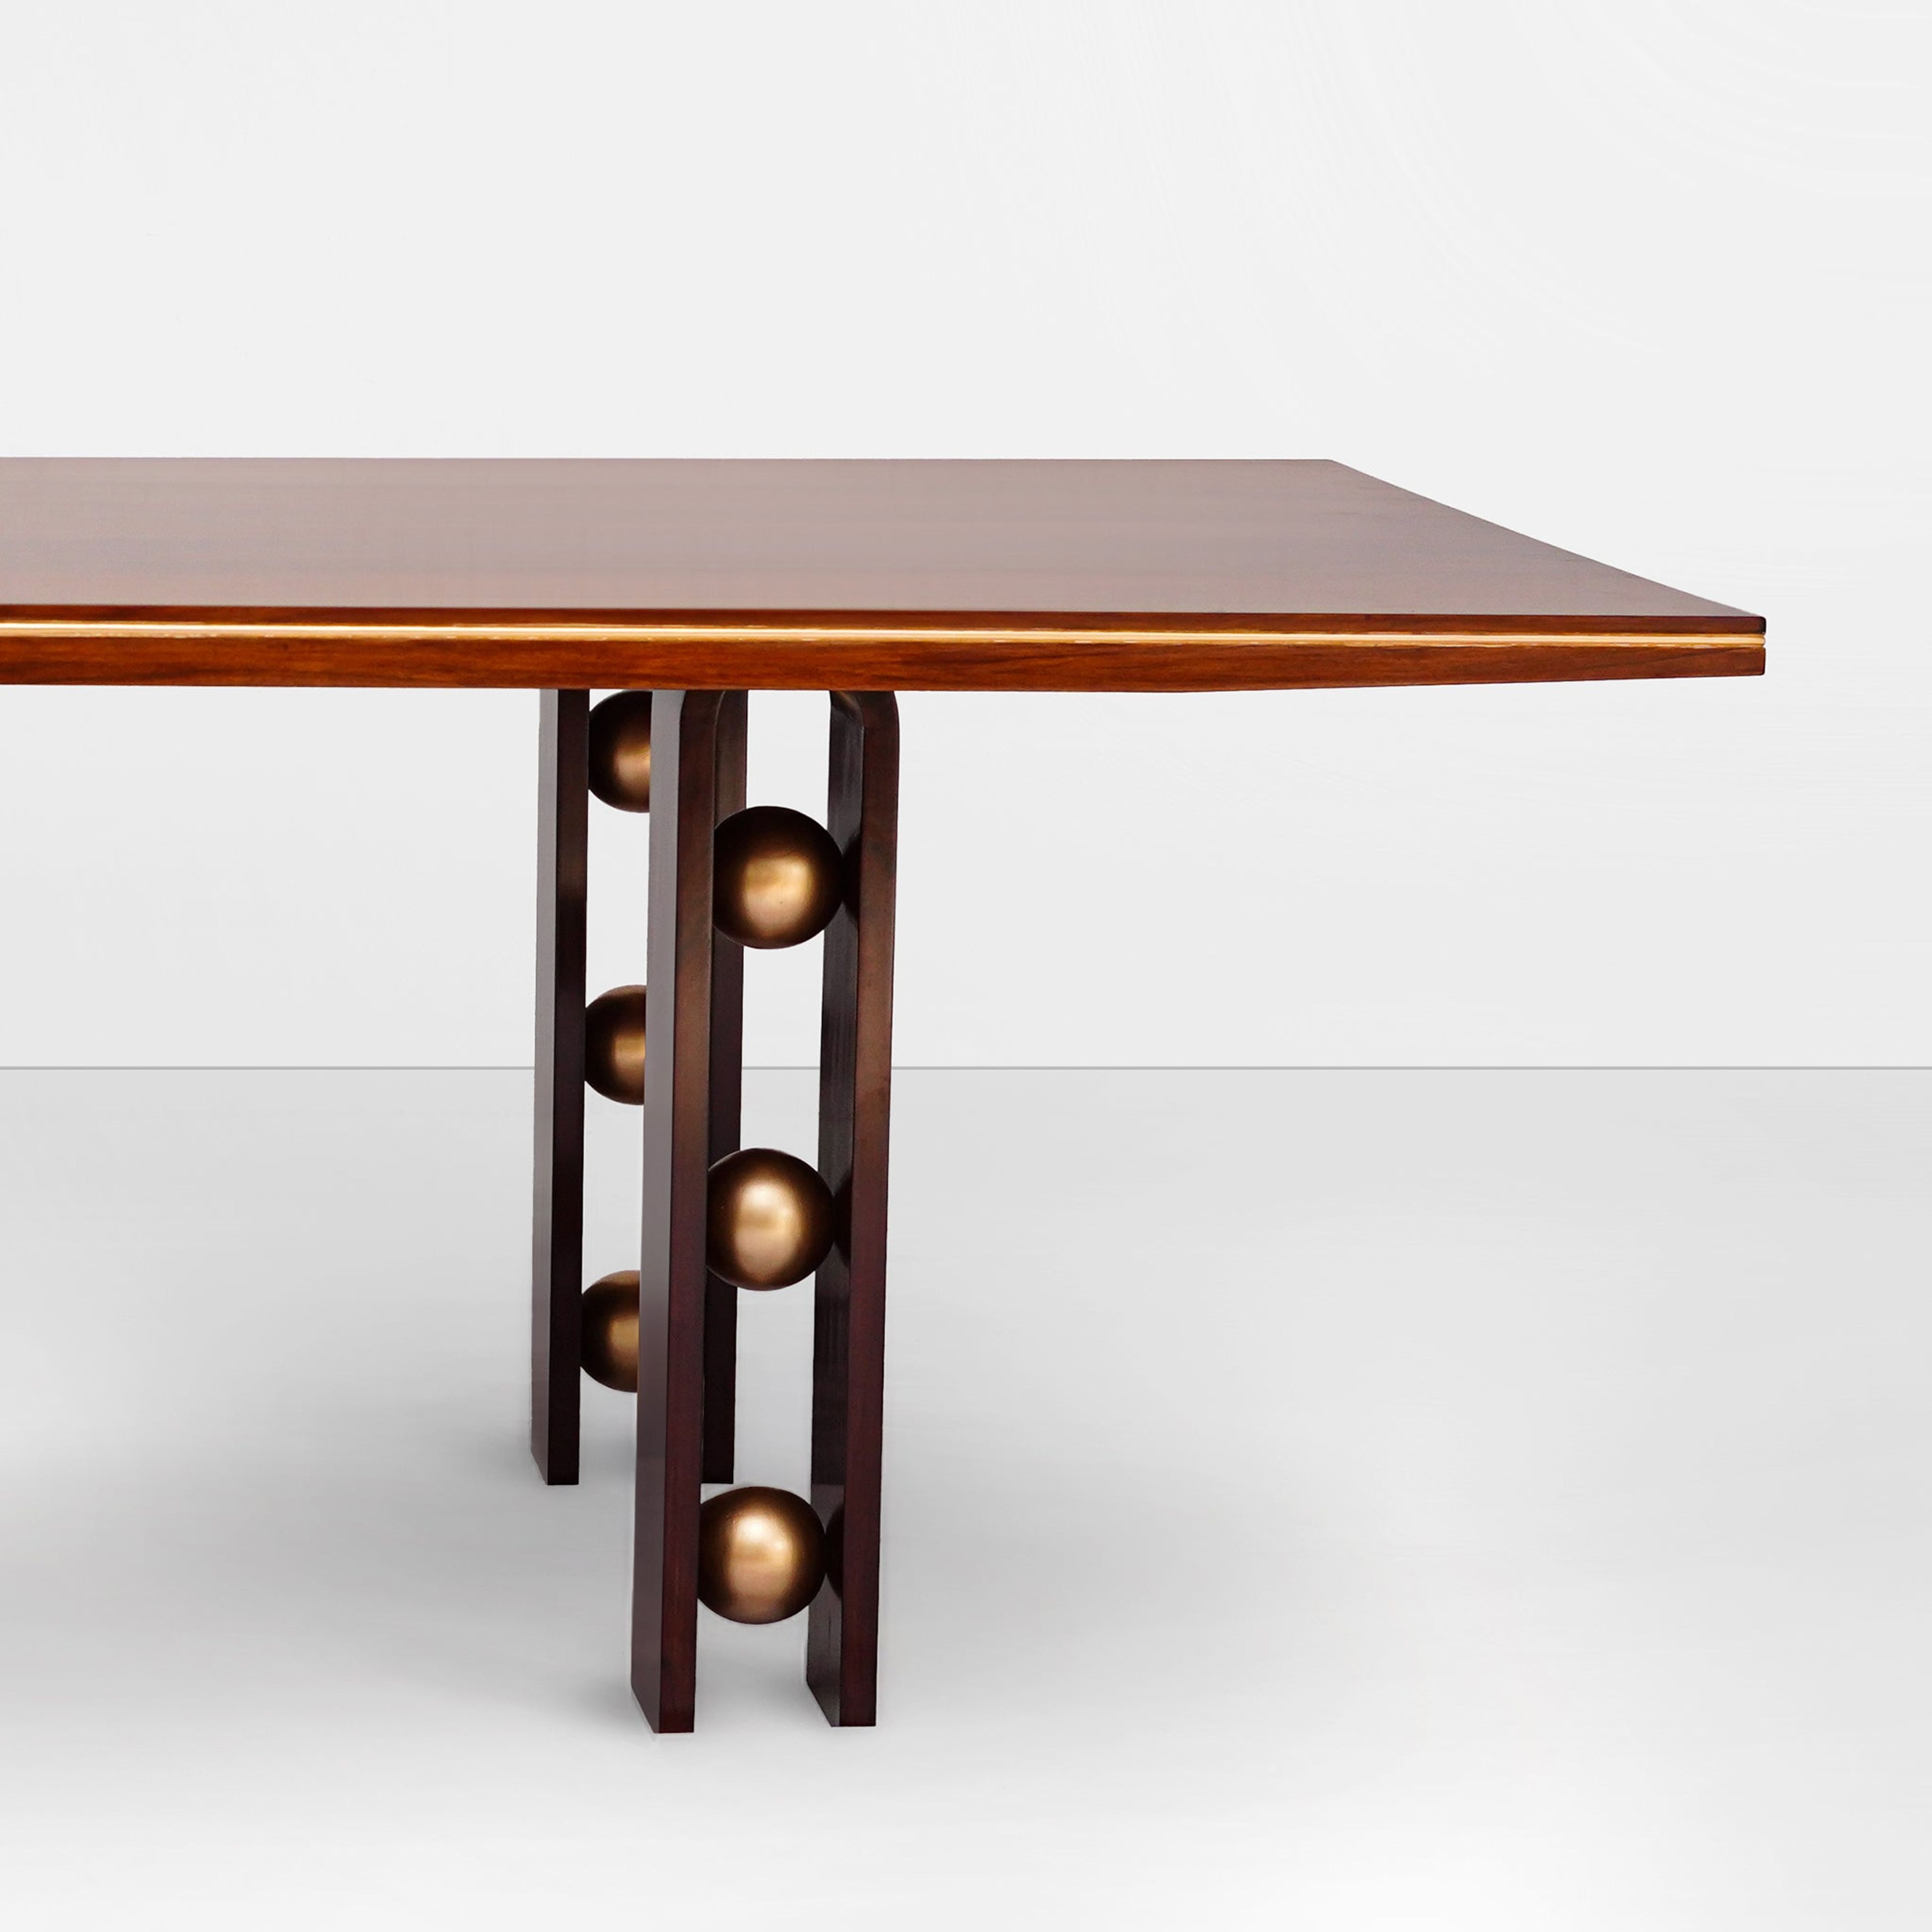 The Mercury Drop Dining Table